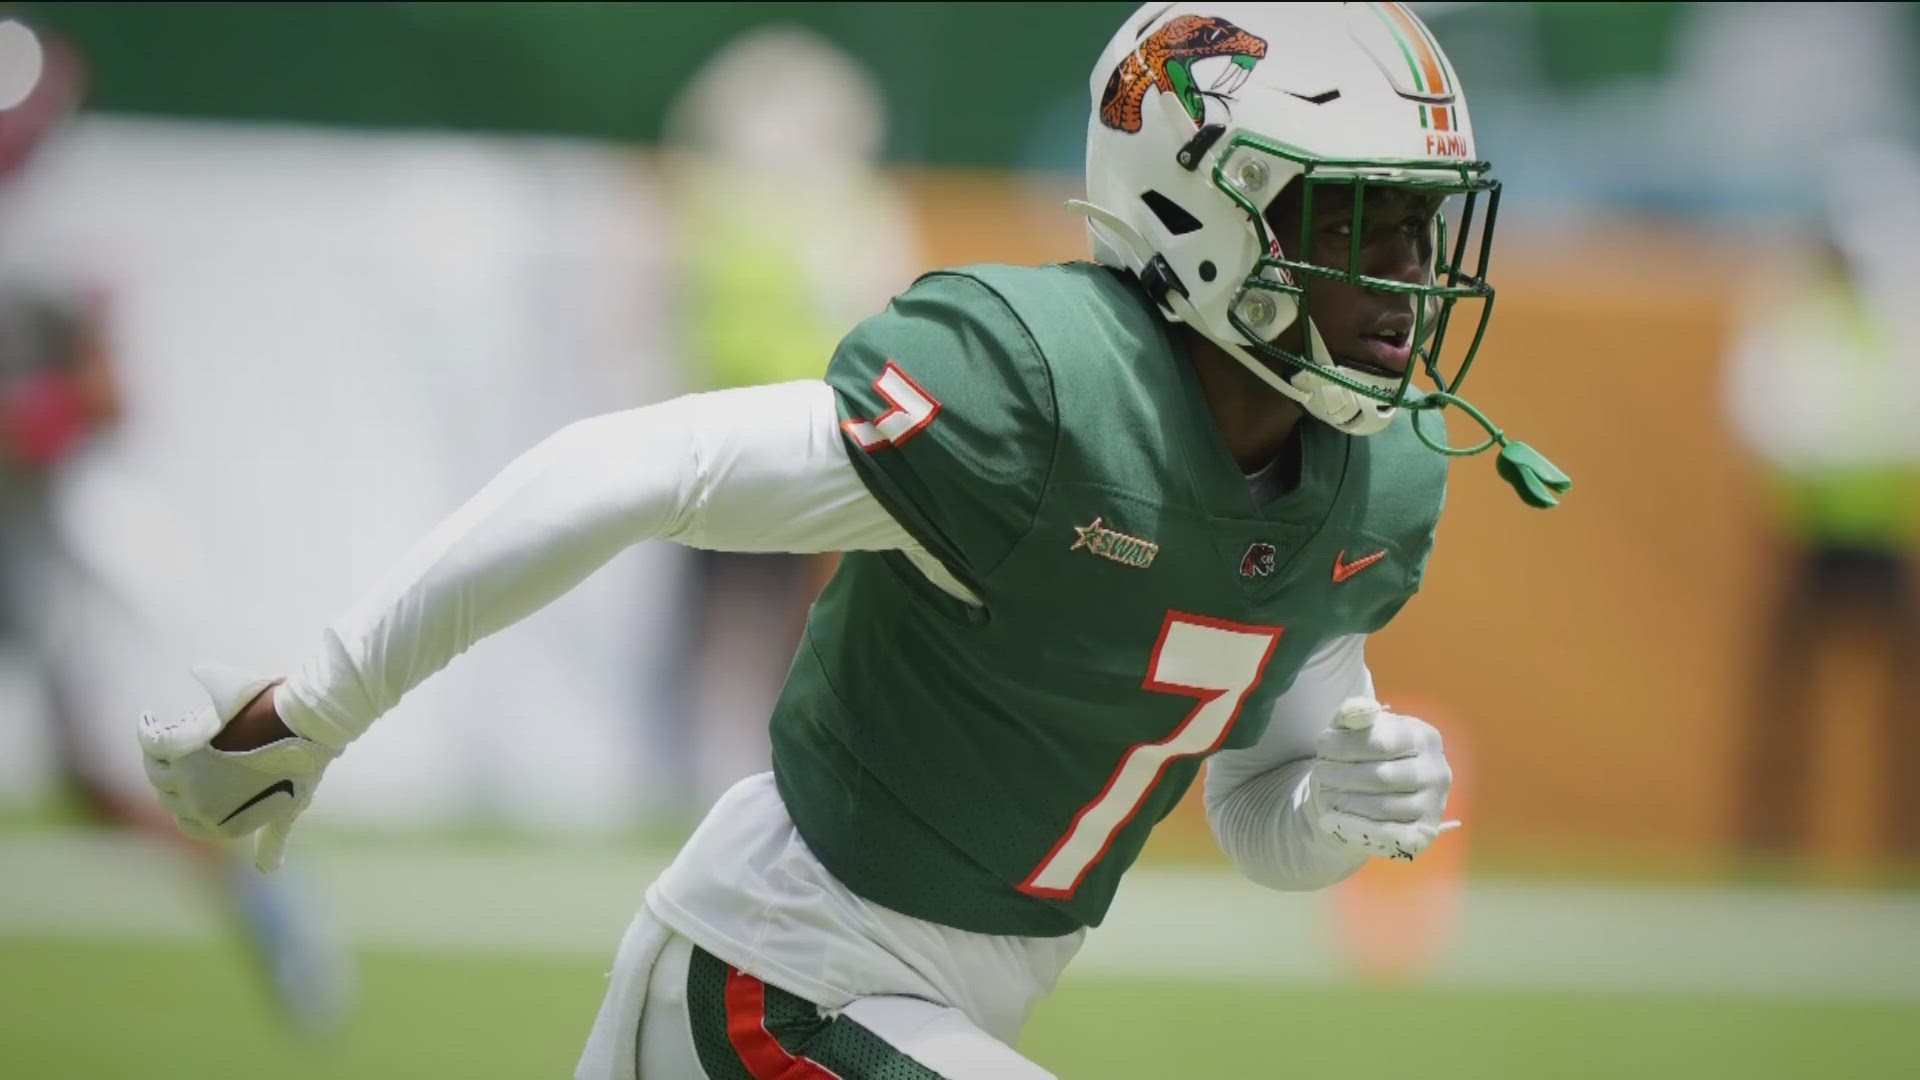 Former Florida A&M defensive back Tevin Griffey will immediately enroll at Boise State and participate in spring ball. He joins the Broncos as a preferred walk-on.